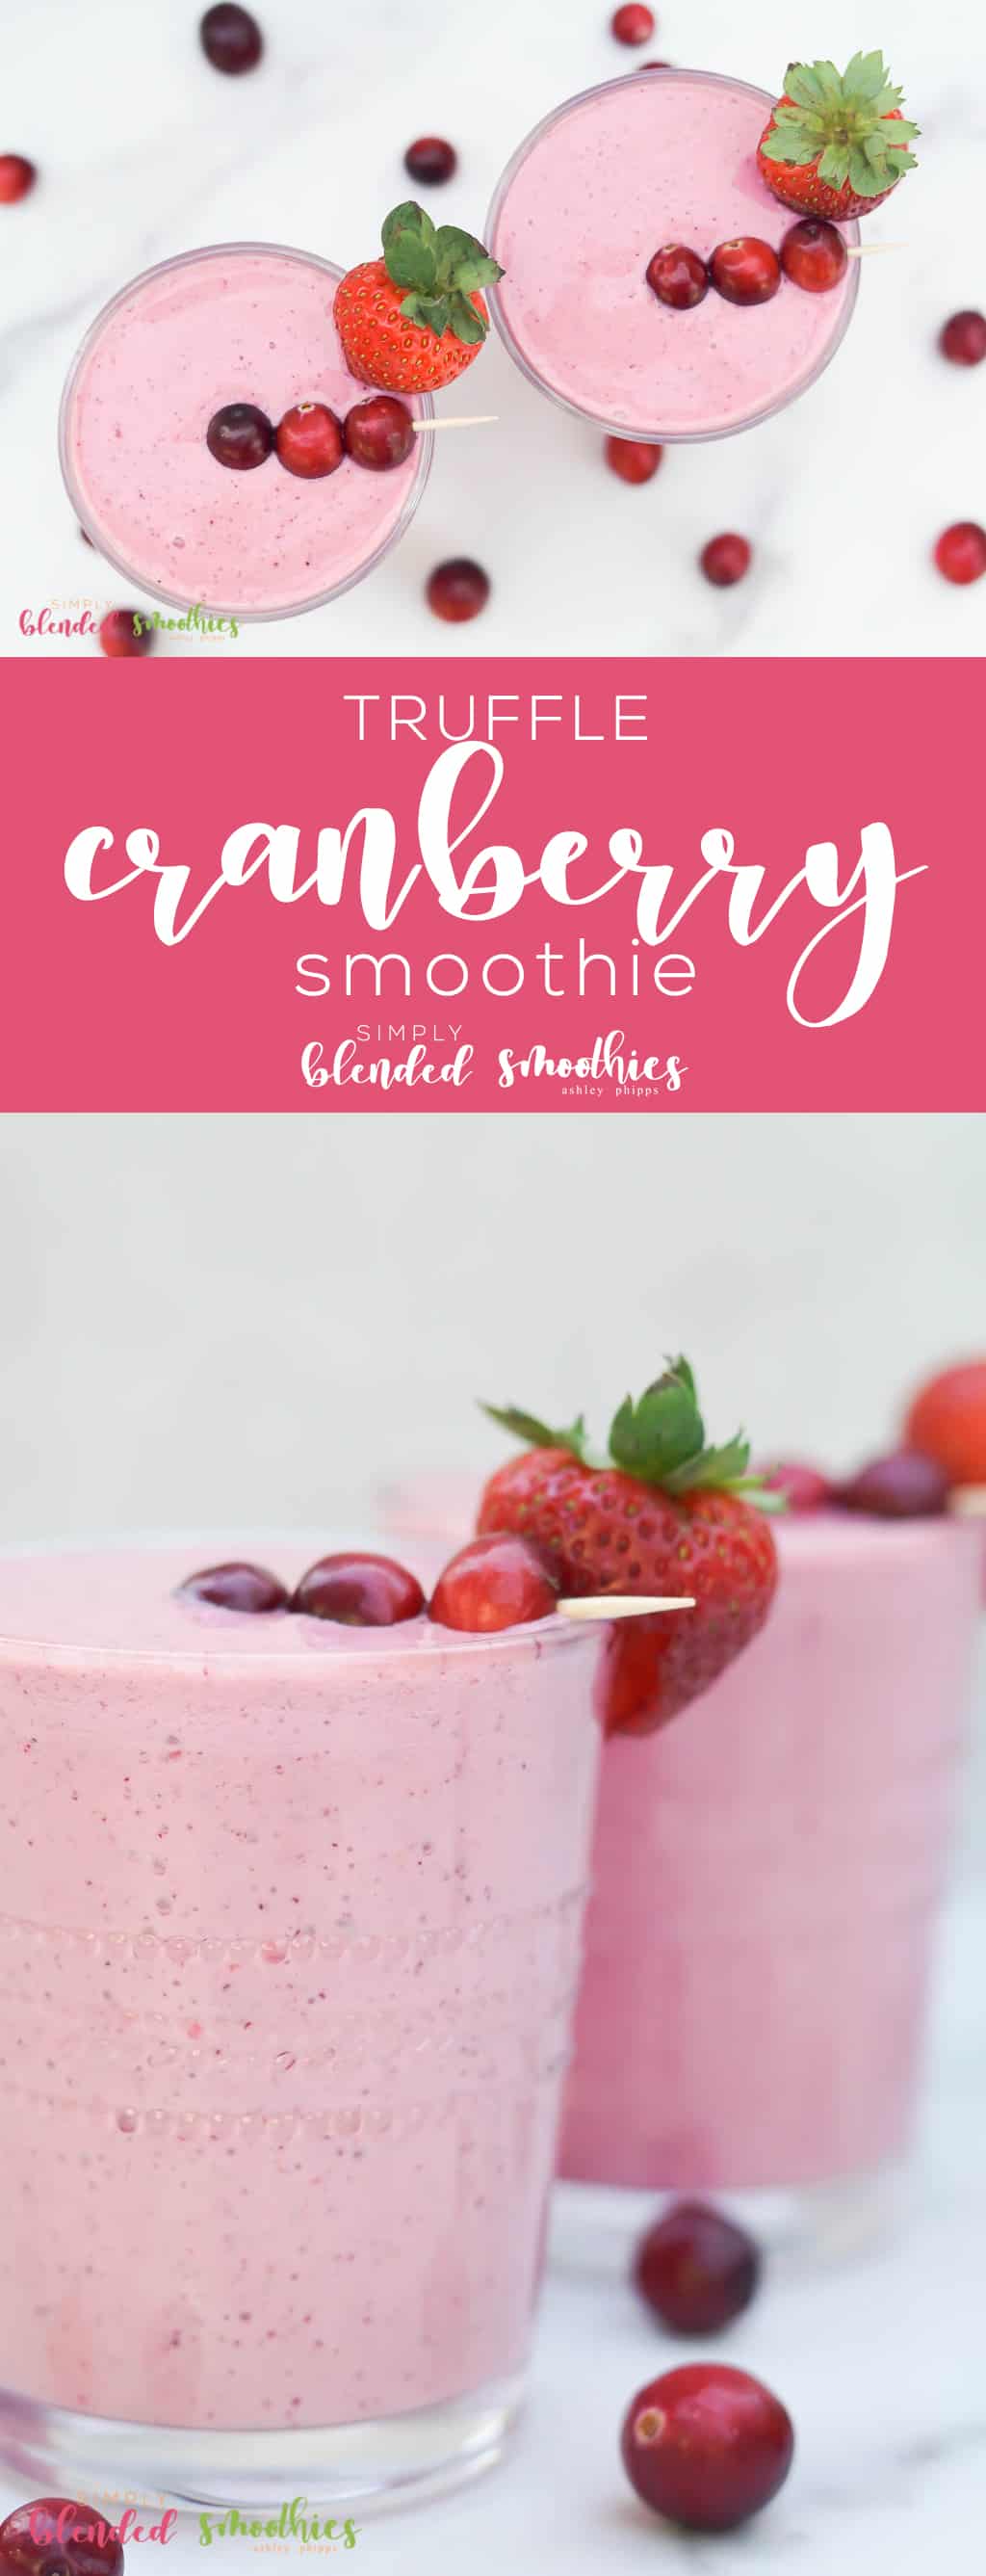 My Family Voted This The Best Smoothie Ever And I Could Not Agree More - This Cranberry Truffle Smoothie Is Incredibly Delicious And Perfect Any Time Of Year